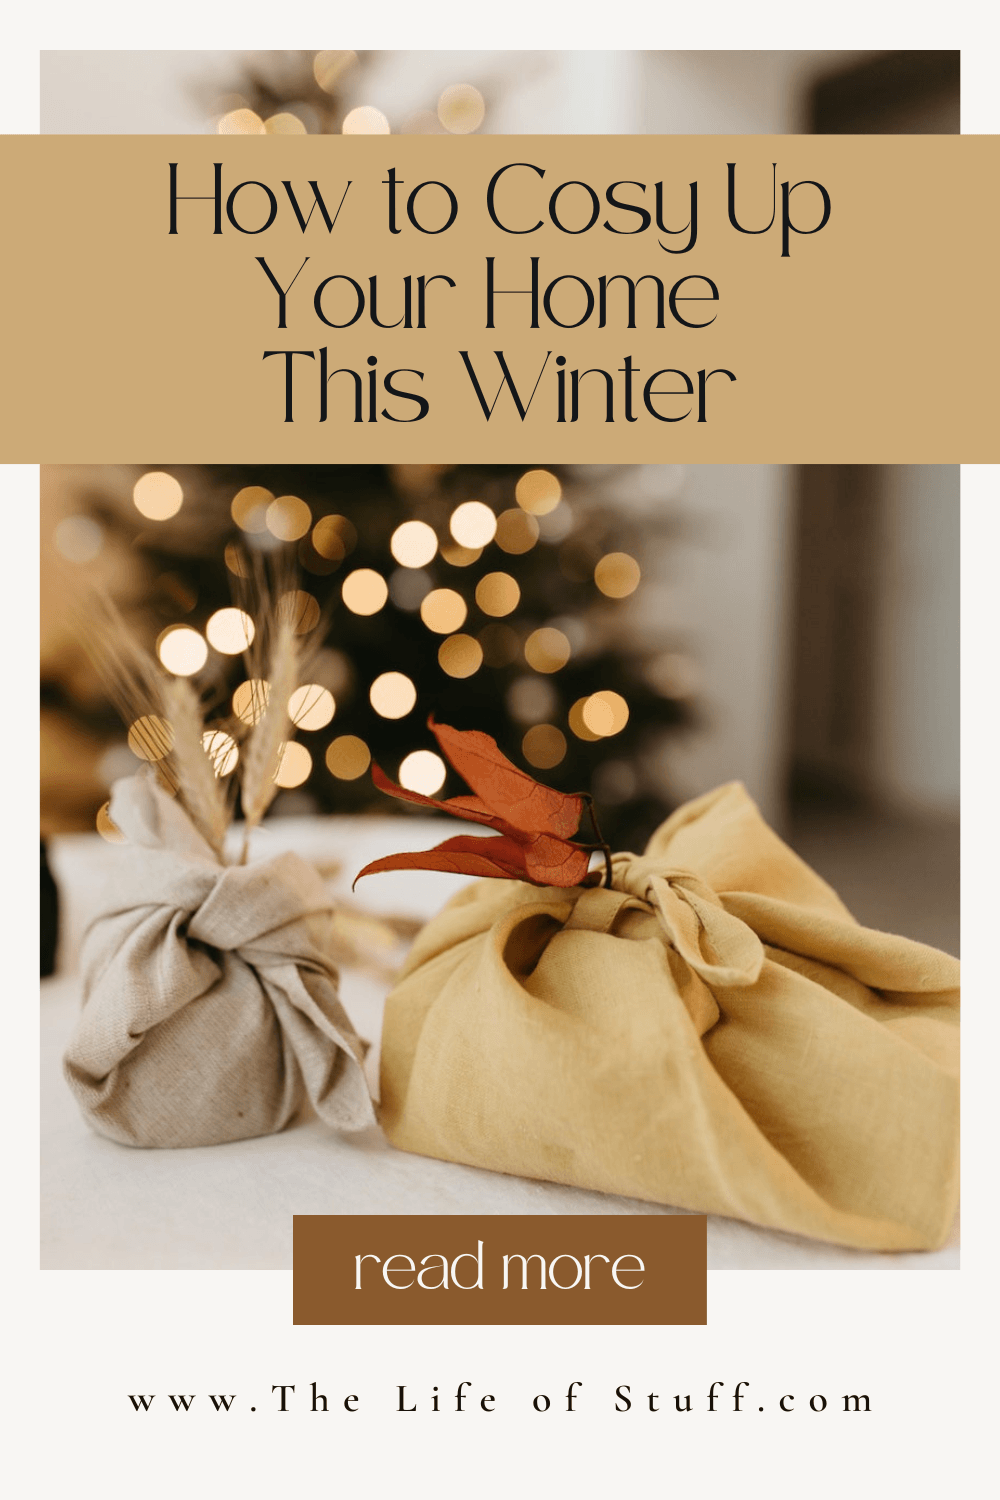 Home Style - How to Cosy Up Your Home This Winter - The Life of Stuff